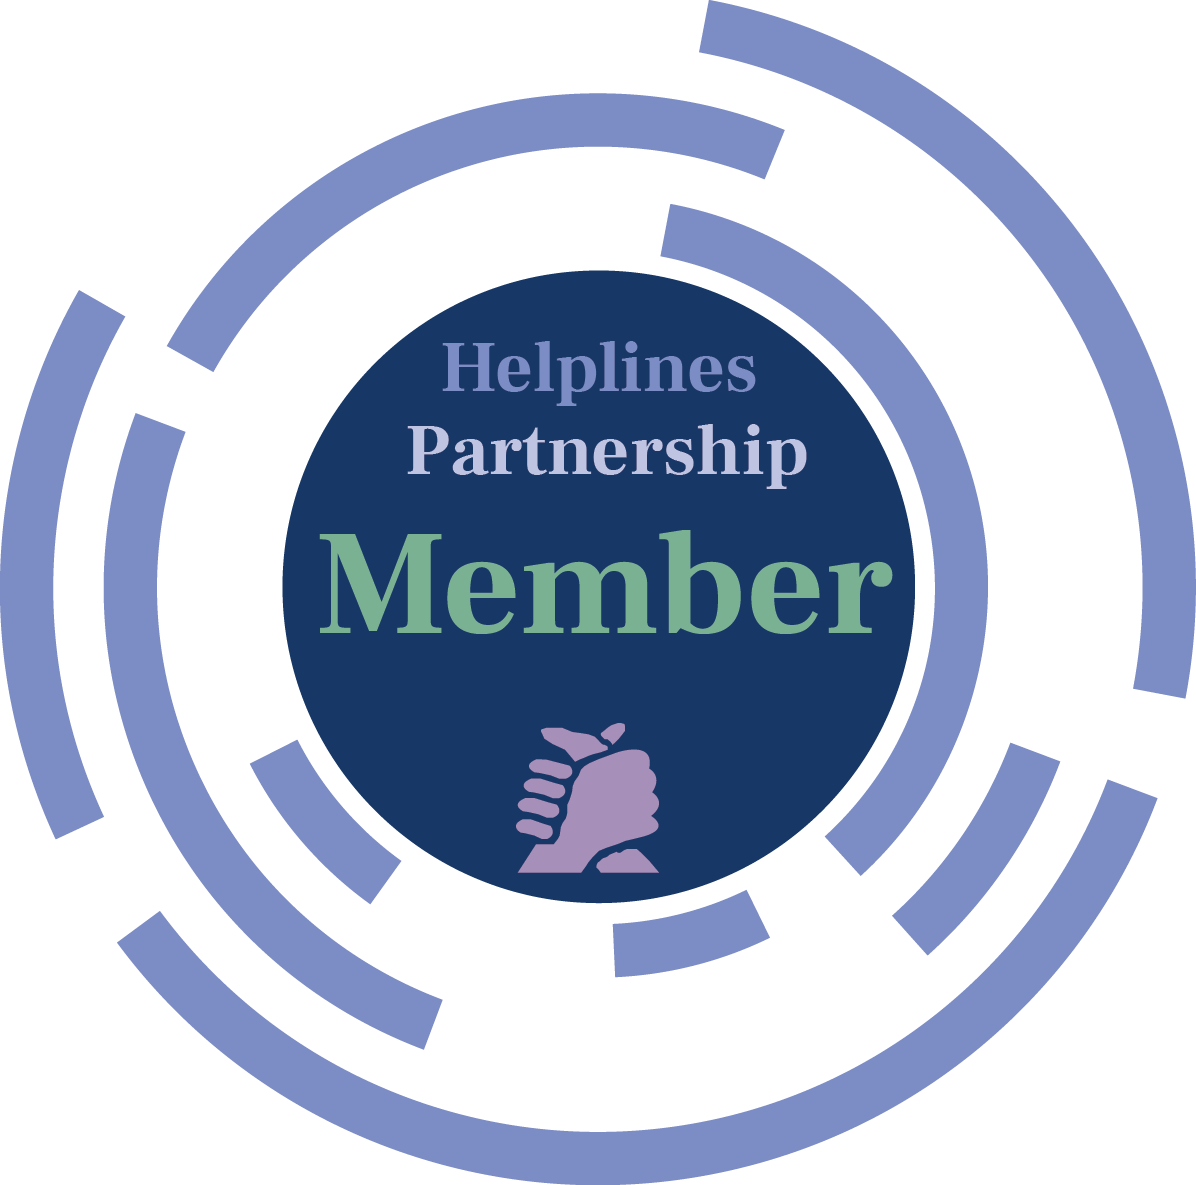 A logo with the text 'Helplines Partnership Member' and an illustration of a handshake